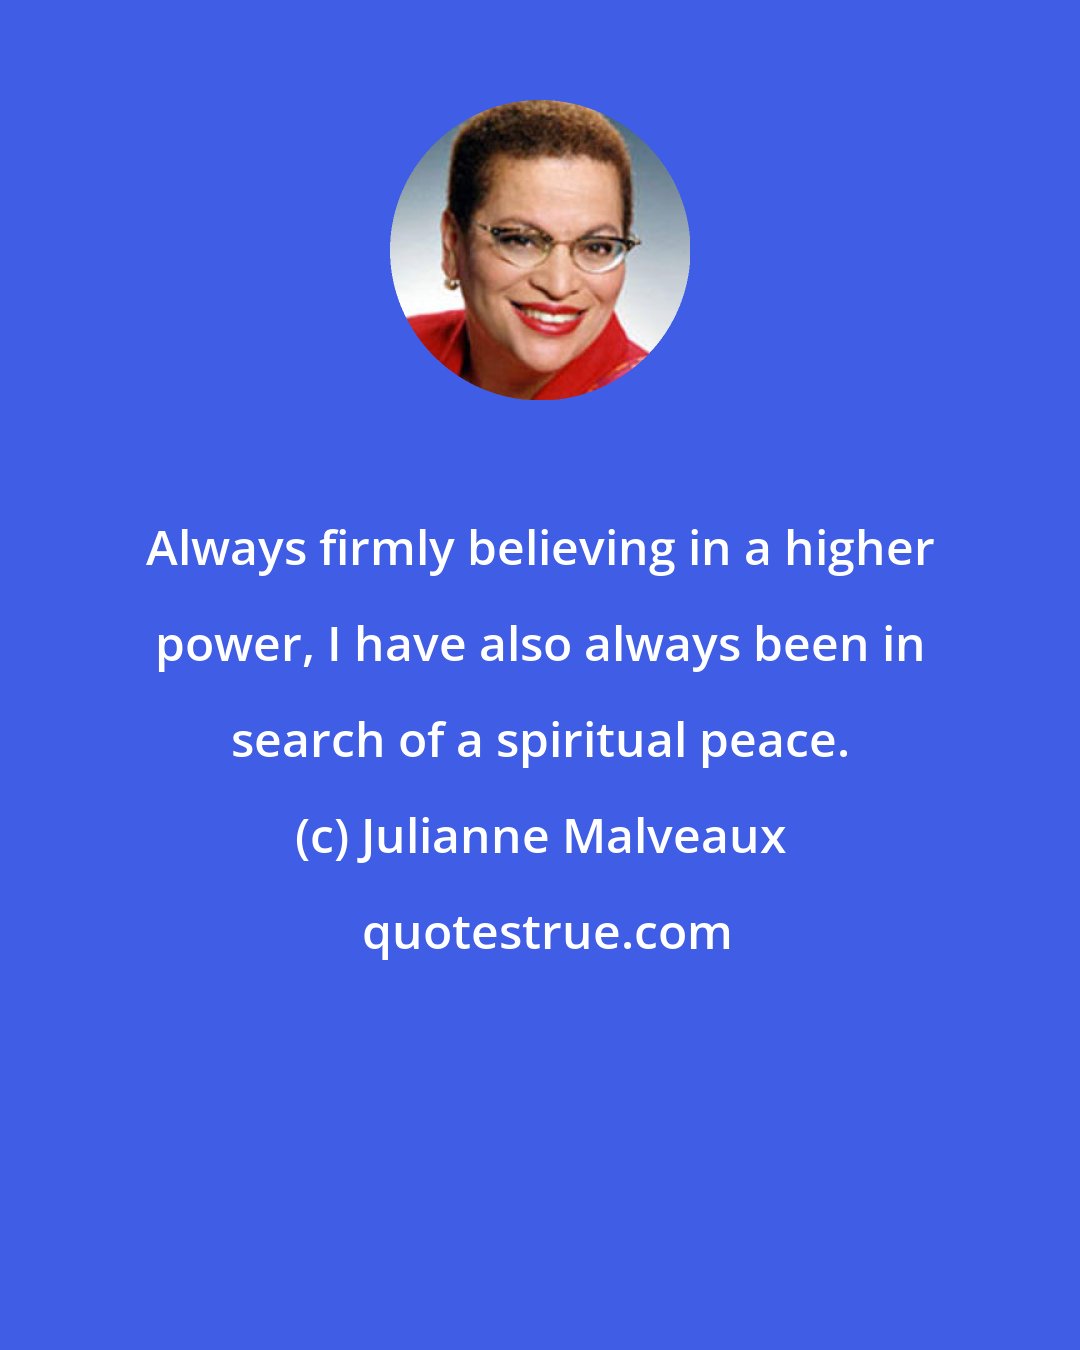 Julianne Malveaux: Always firmly believing in a higher power, I have also always been in search of a spiritual peace.